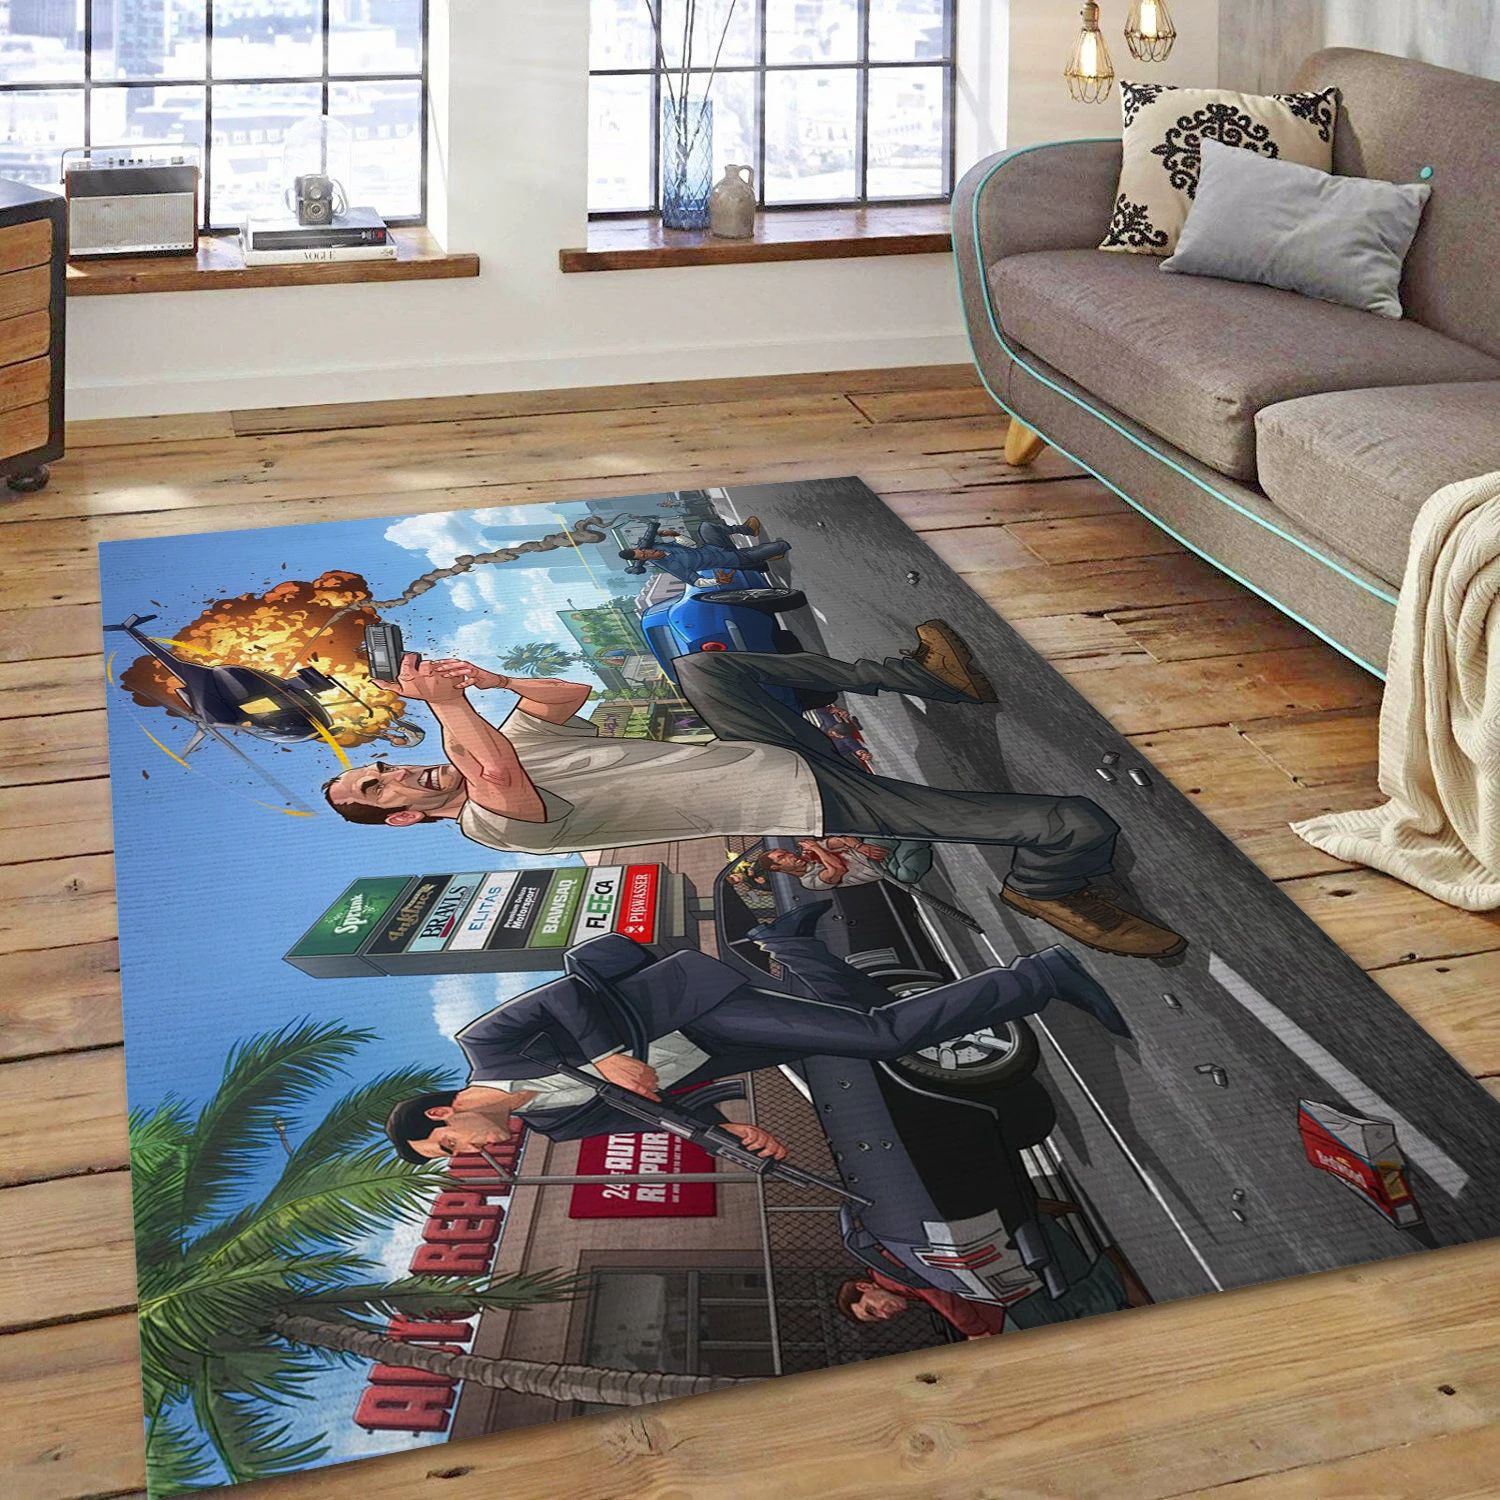 Grand Theft Auto V Video Game Area Rug For Christmas, Area Rug - Home Decor Floor Decor - Indoor Outdoor Rugs